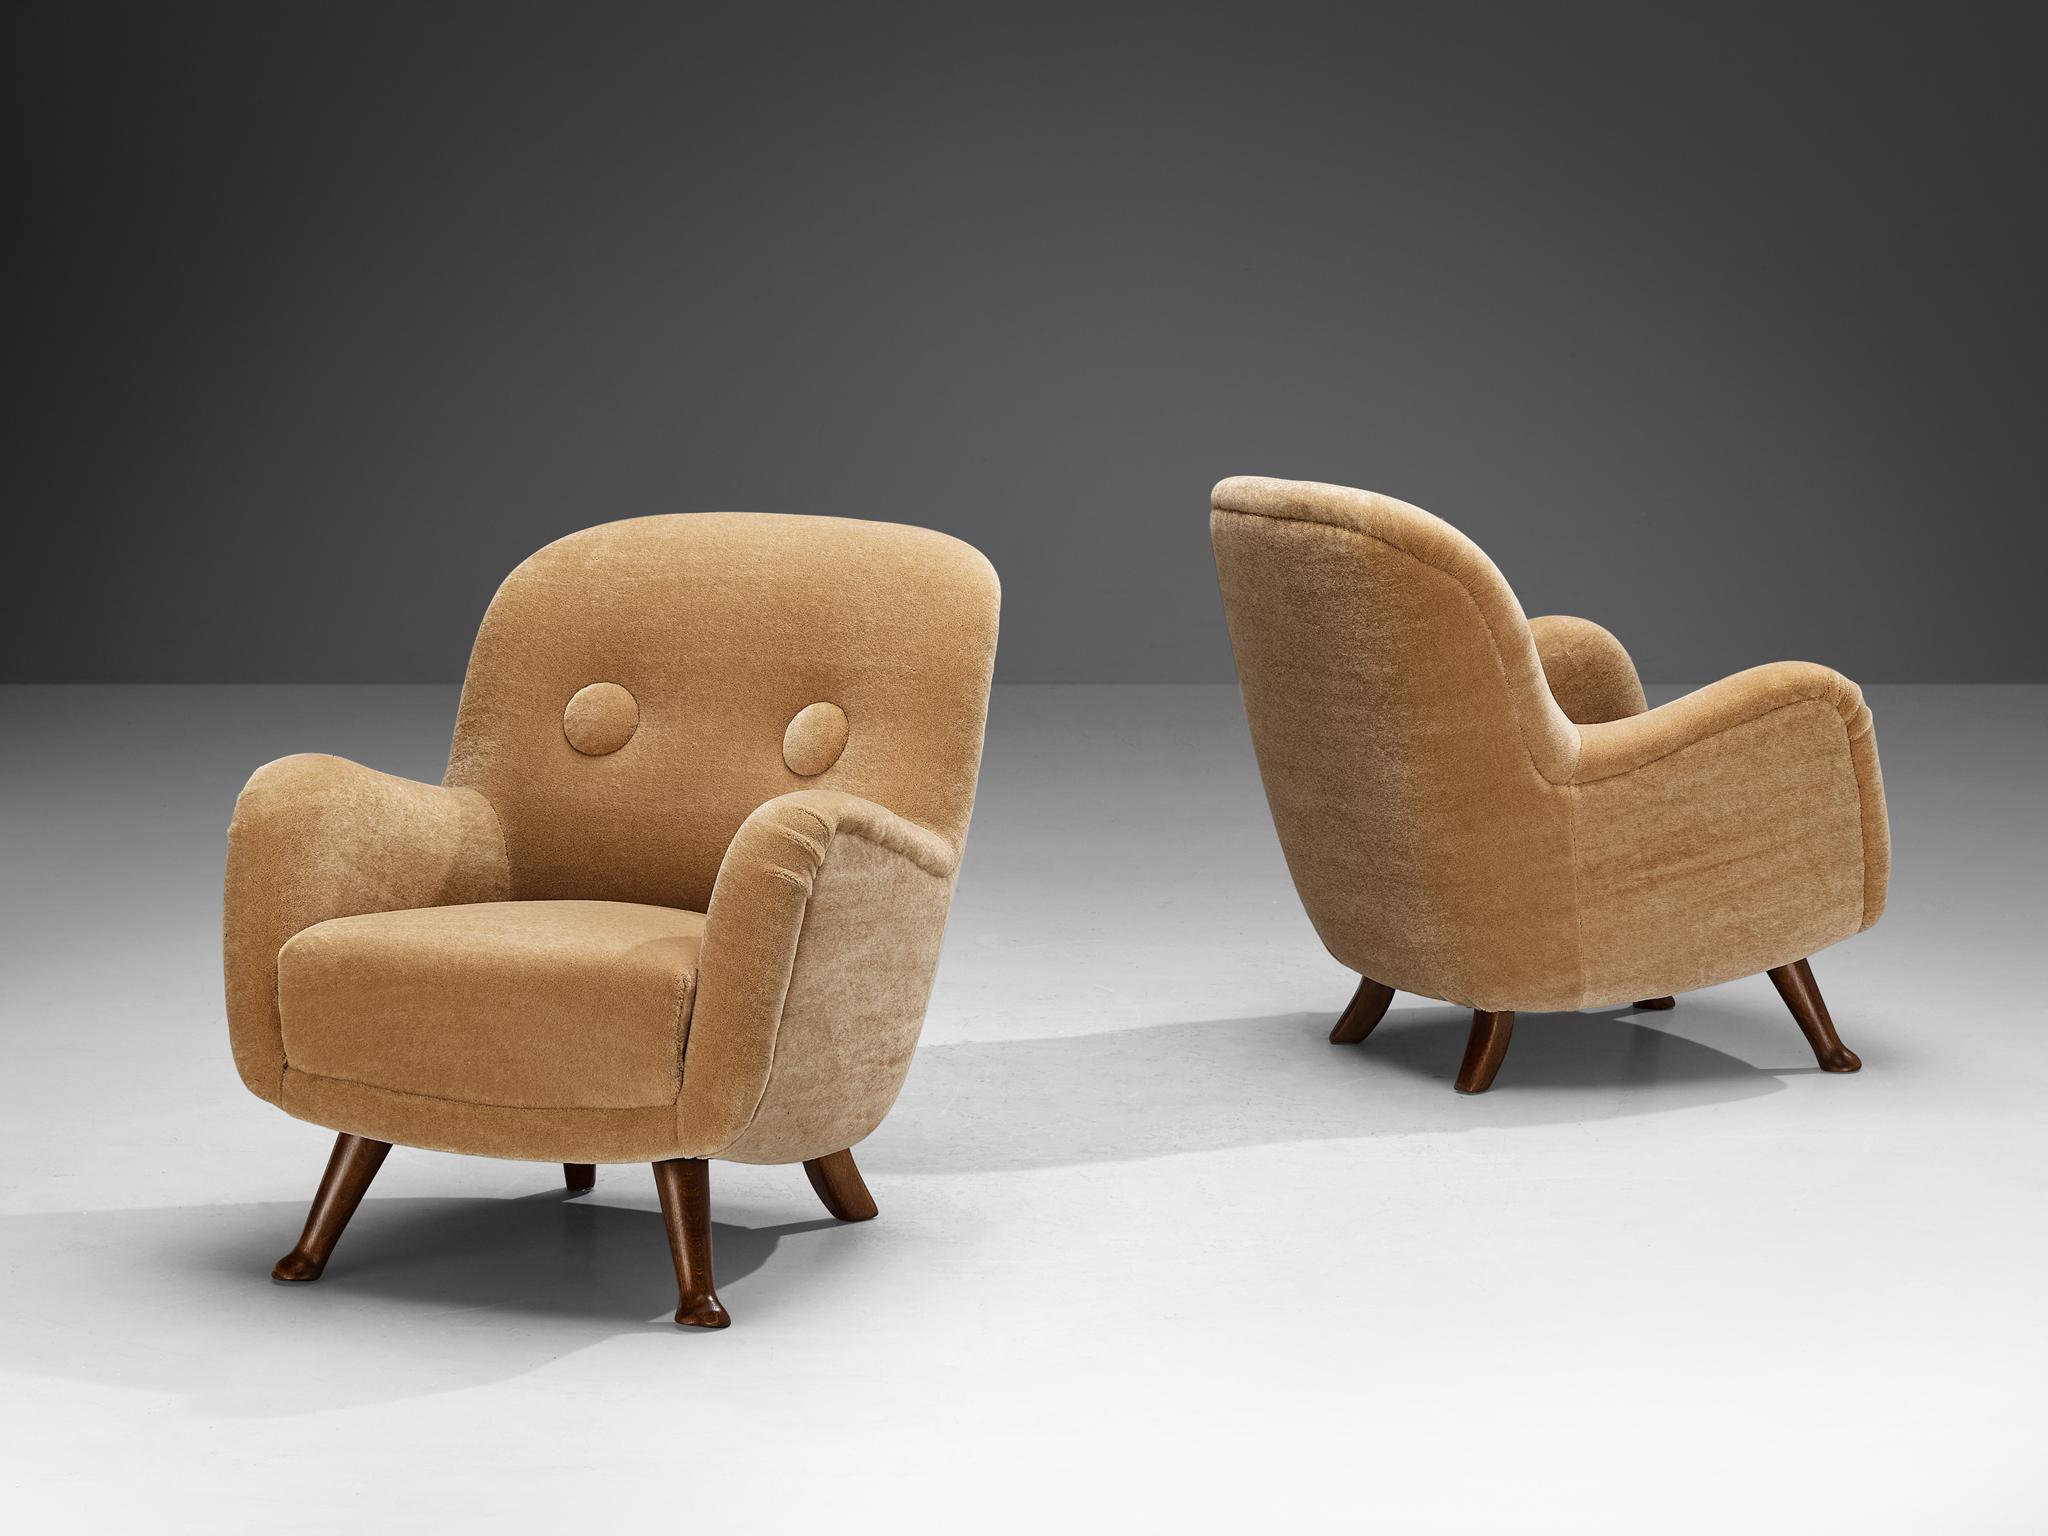 Berga Mobler, pair of armchairs, beige teddy fabric, beech, Denmark, 1940s

This bold and curvy armchair is based on a solid construction with a tender touch due to the soft texture of the teddy fabric. The whole shell is slightly tilted backwards.